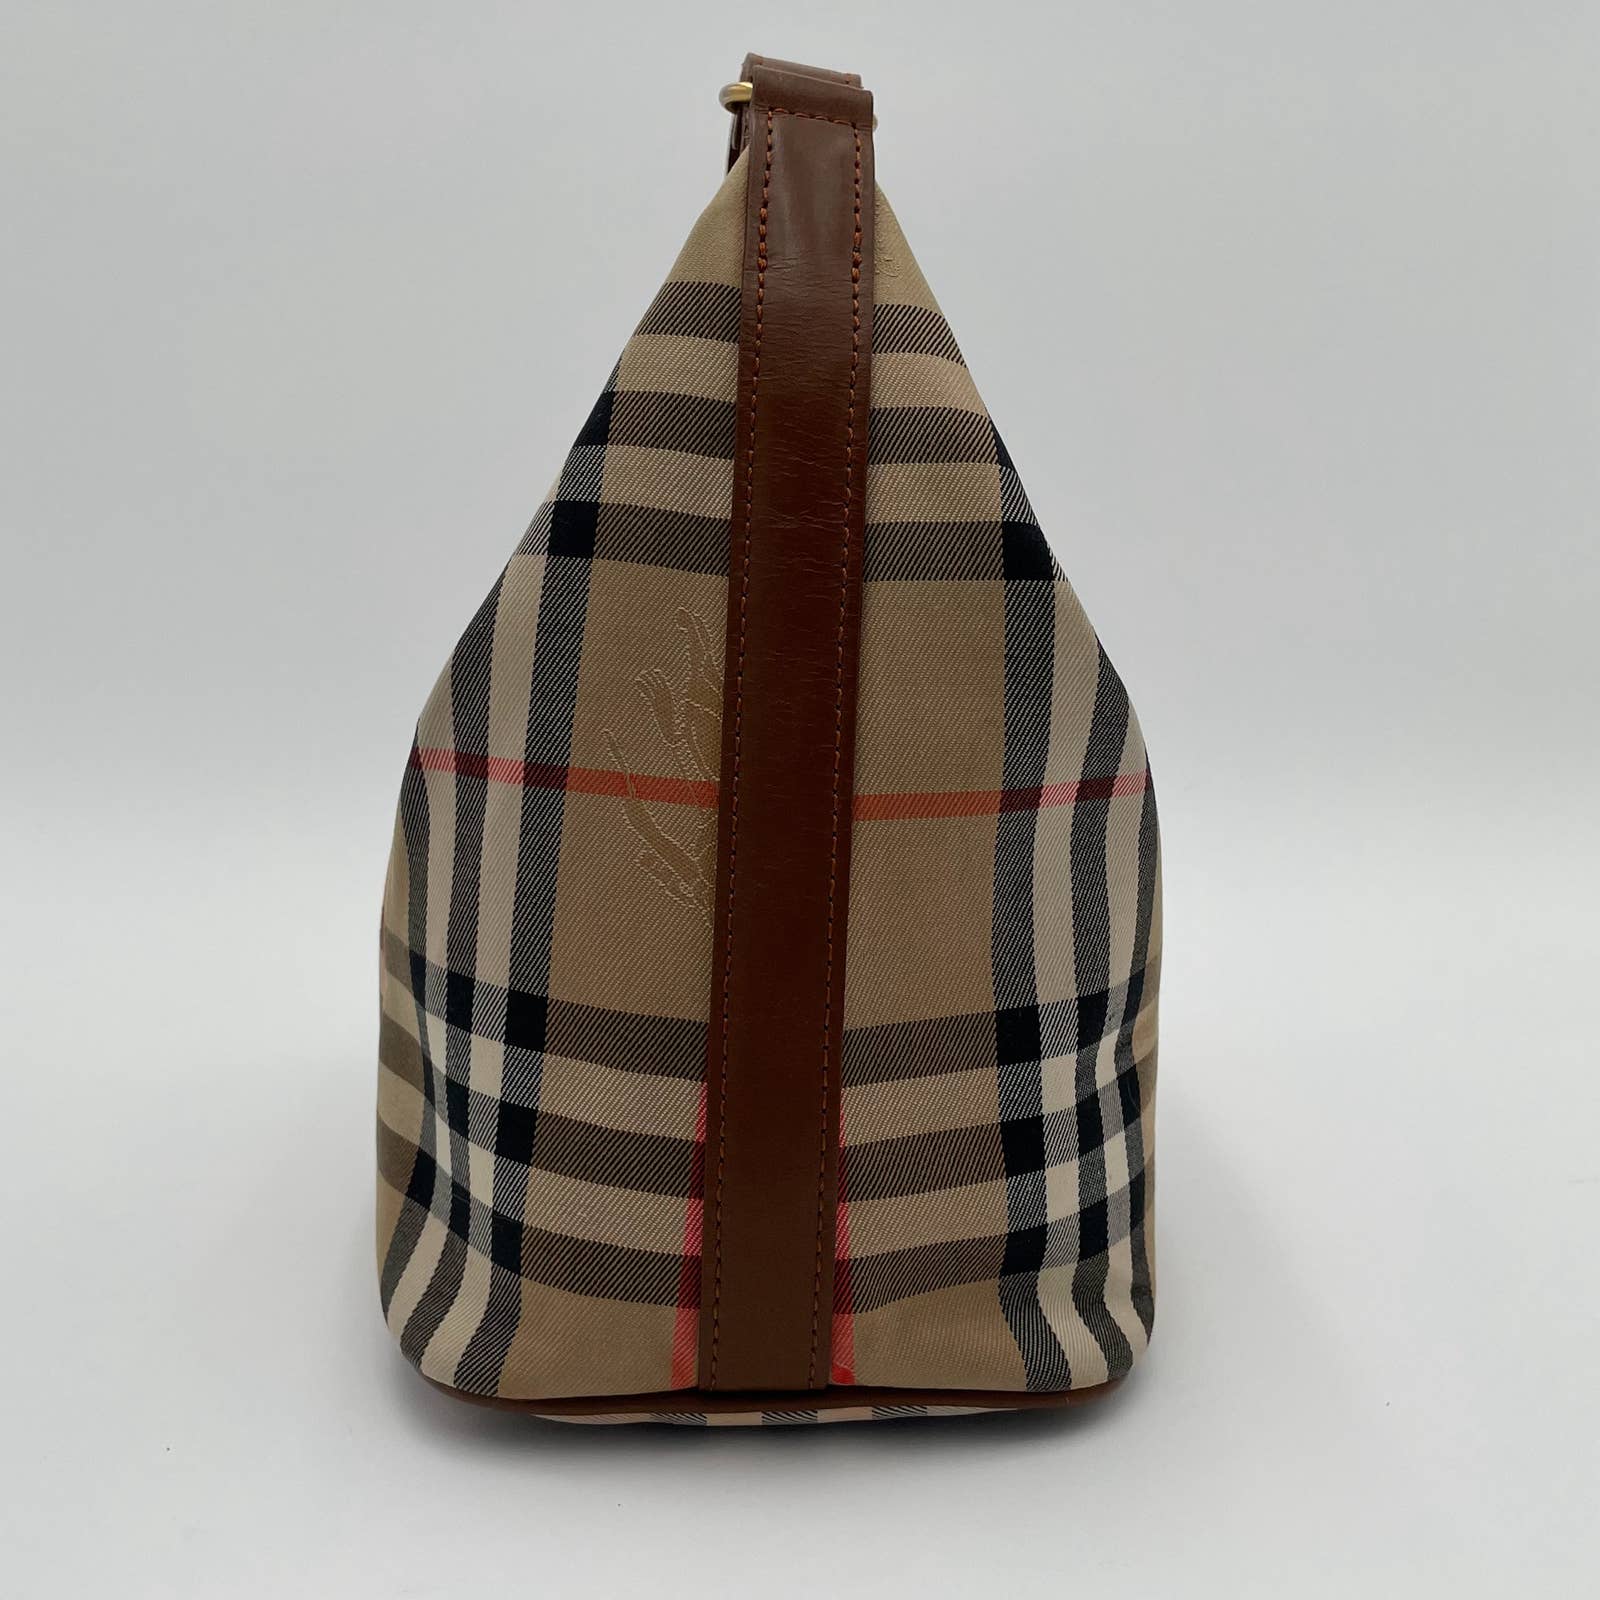 A side view of a stylish beige tote bag with a classic plaid pattern featuring black, white, and red lines. The Burberry Vintage House Check Bag has a brown leather strap running vertically from top to bottom and is crafted from canvas with leather trim. The background is plain white.